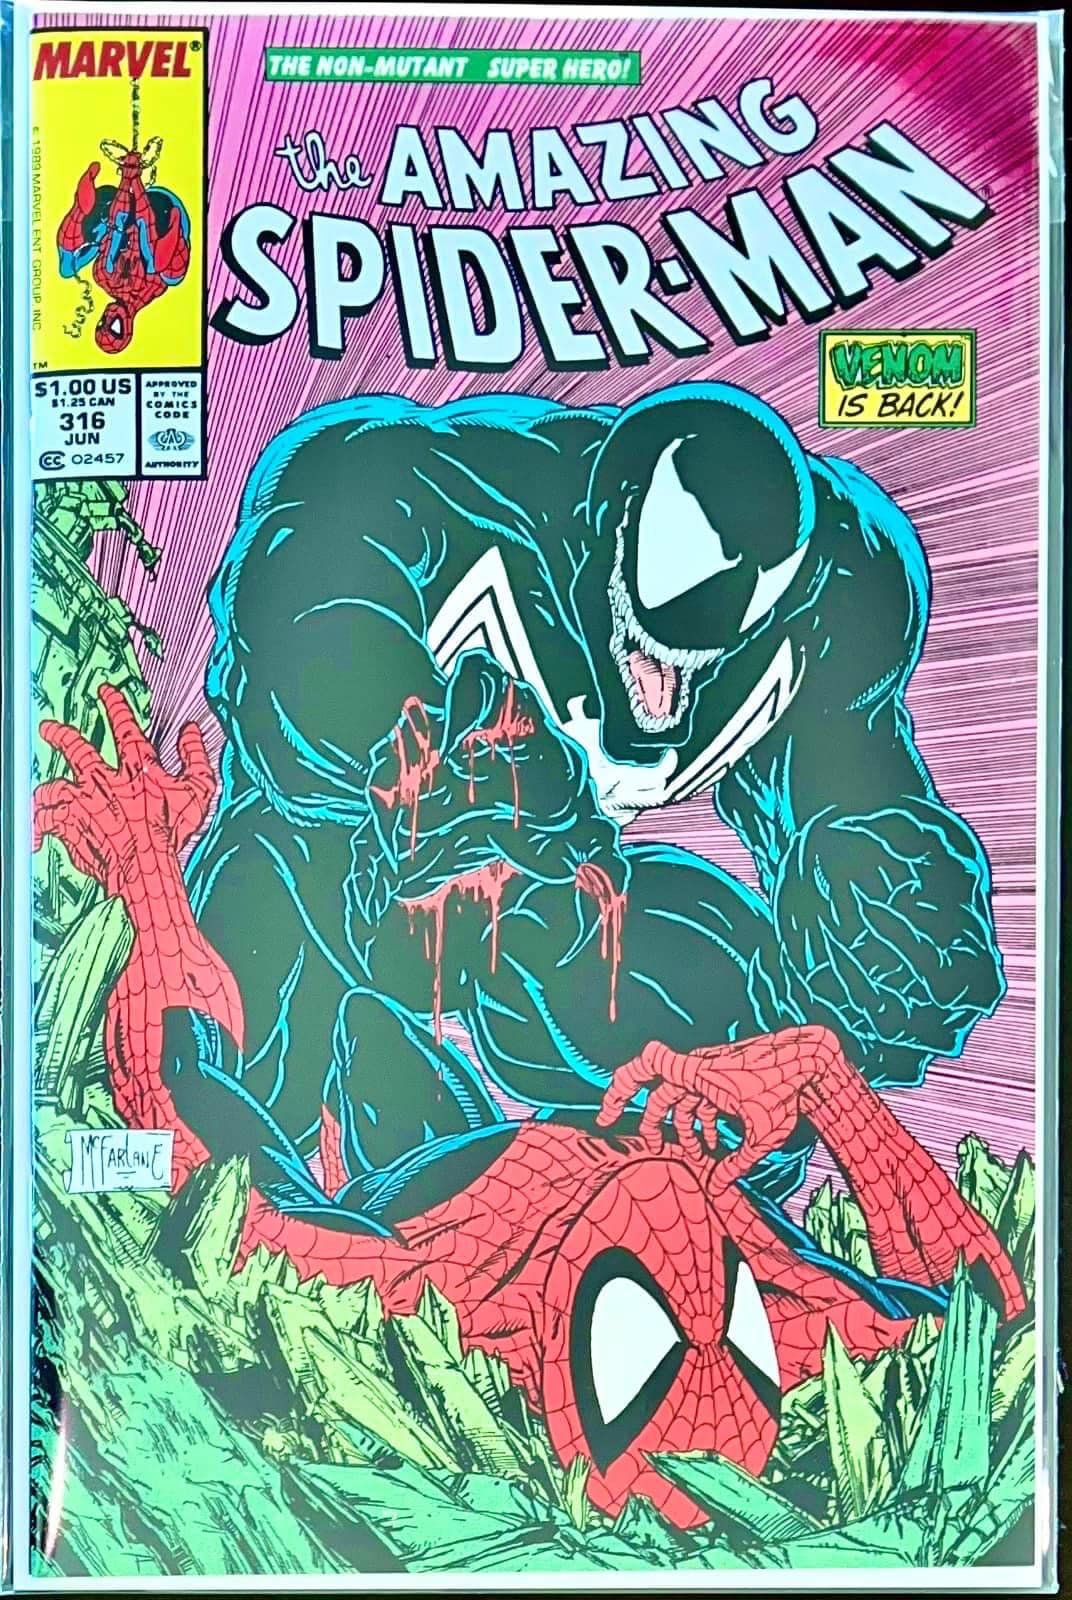 AMAZING SPIDER-MAN #316 TODD MCFARLANE MEXICAN FOIL VARIANT LIMITED TO 1000 COPIES